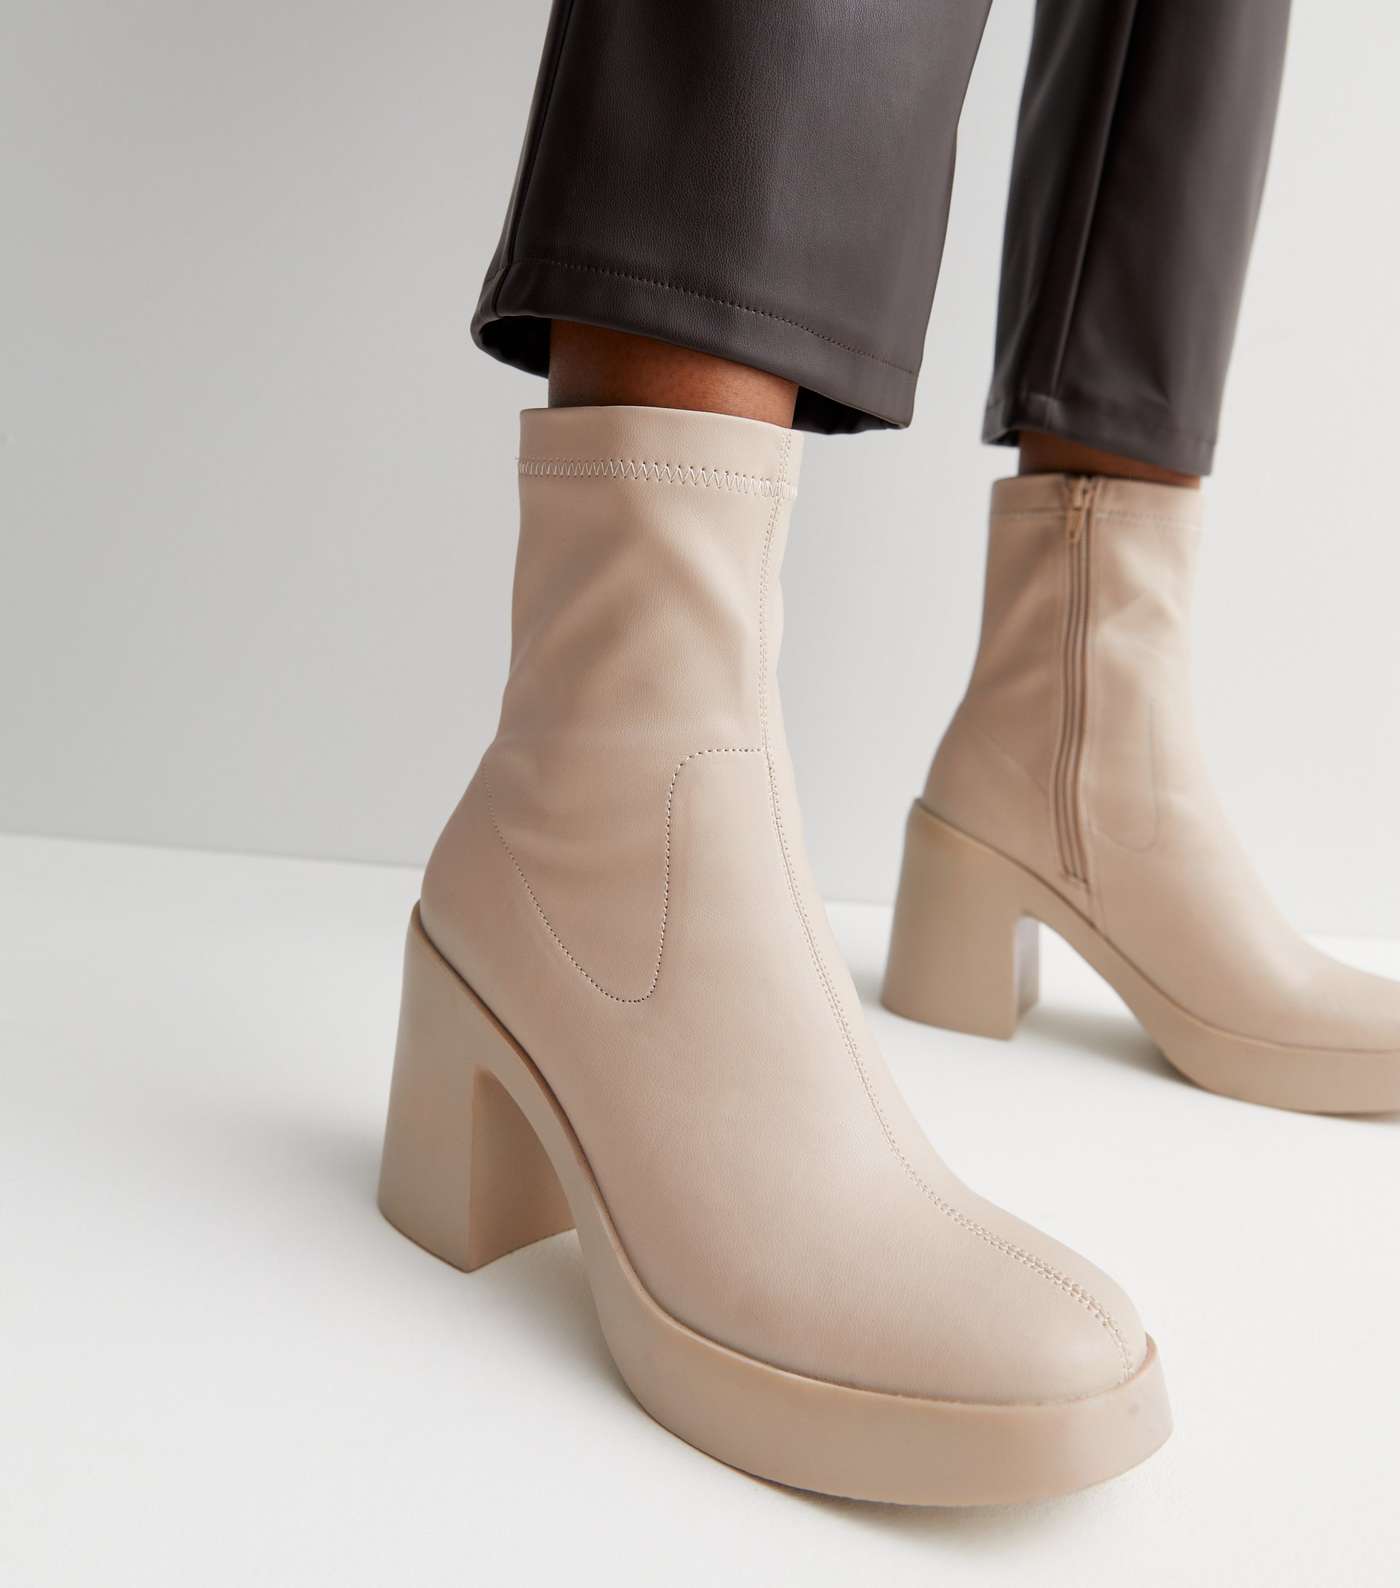 Off White Leather-Look Chunky Block Heel Sock Boots Image 2